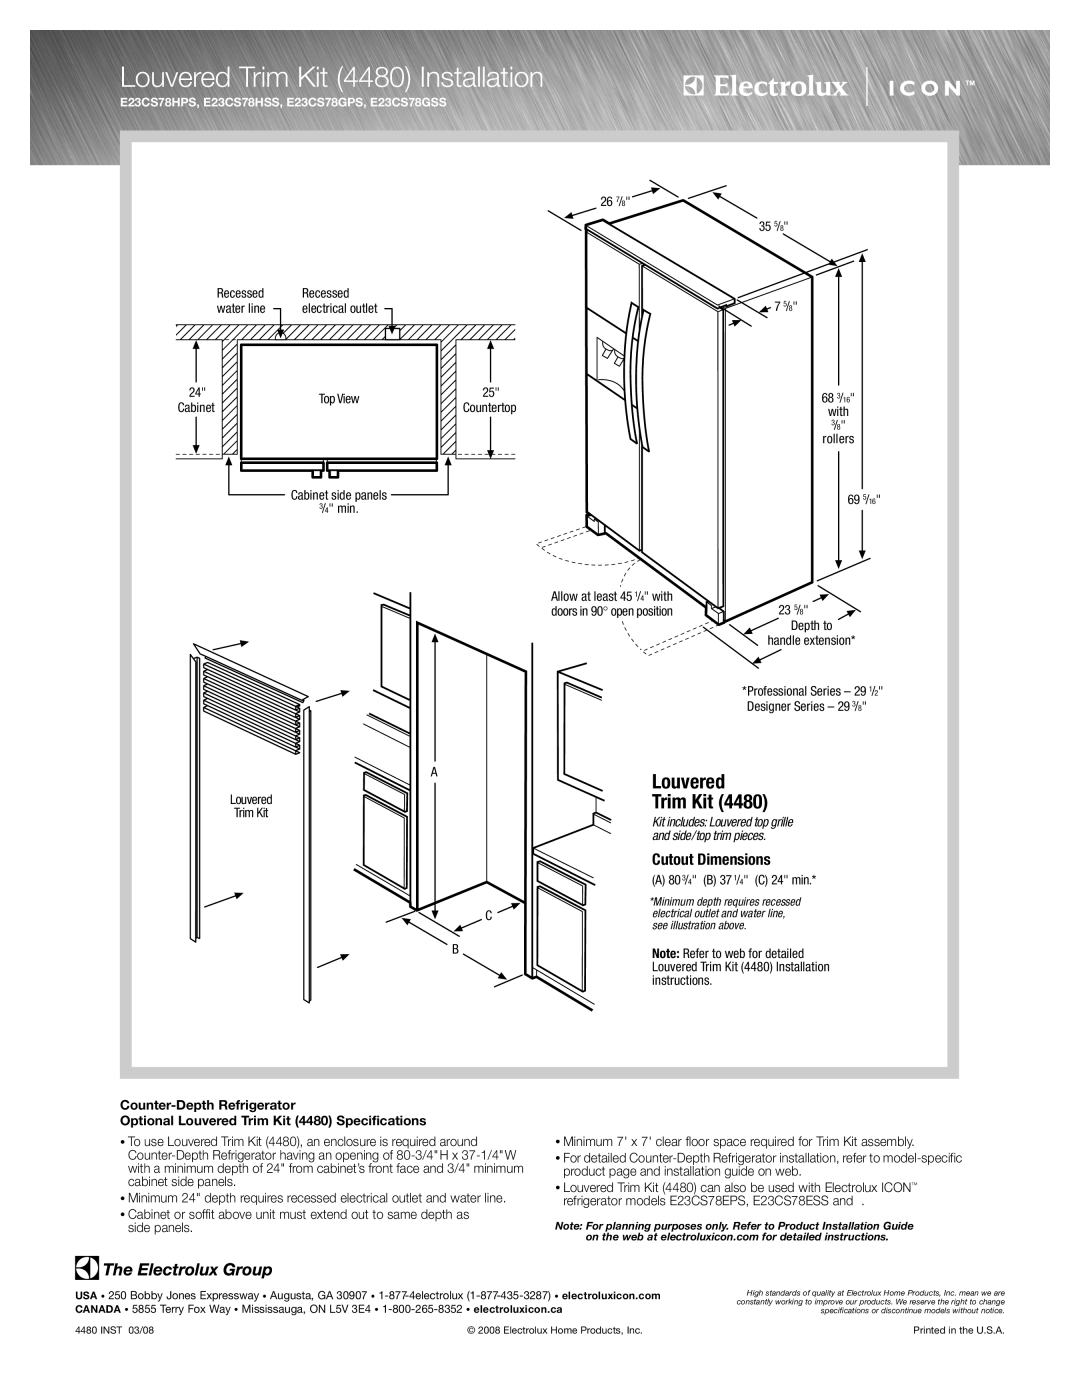 Electrolux E23CS78HSS specifications Louvered Trim Kit 4480 Installation, Cutout Dimensions, Counter-Depth Refrigerator 